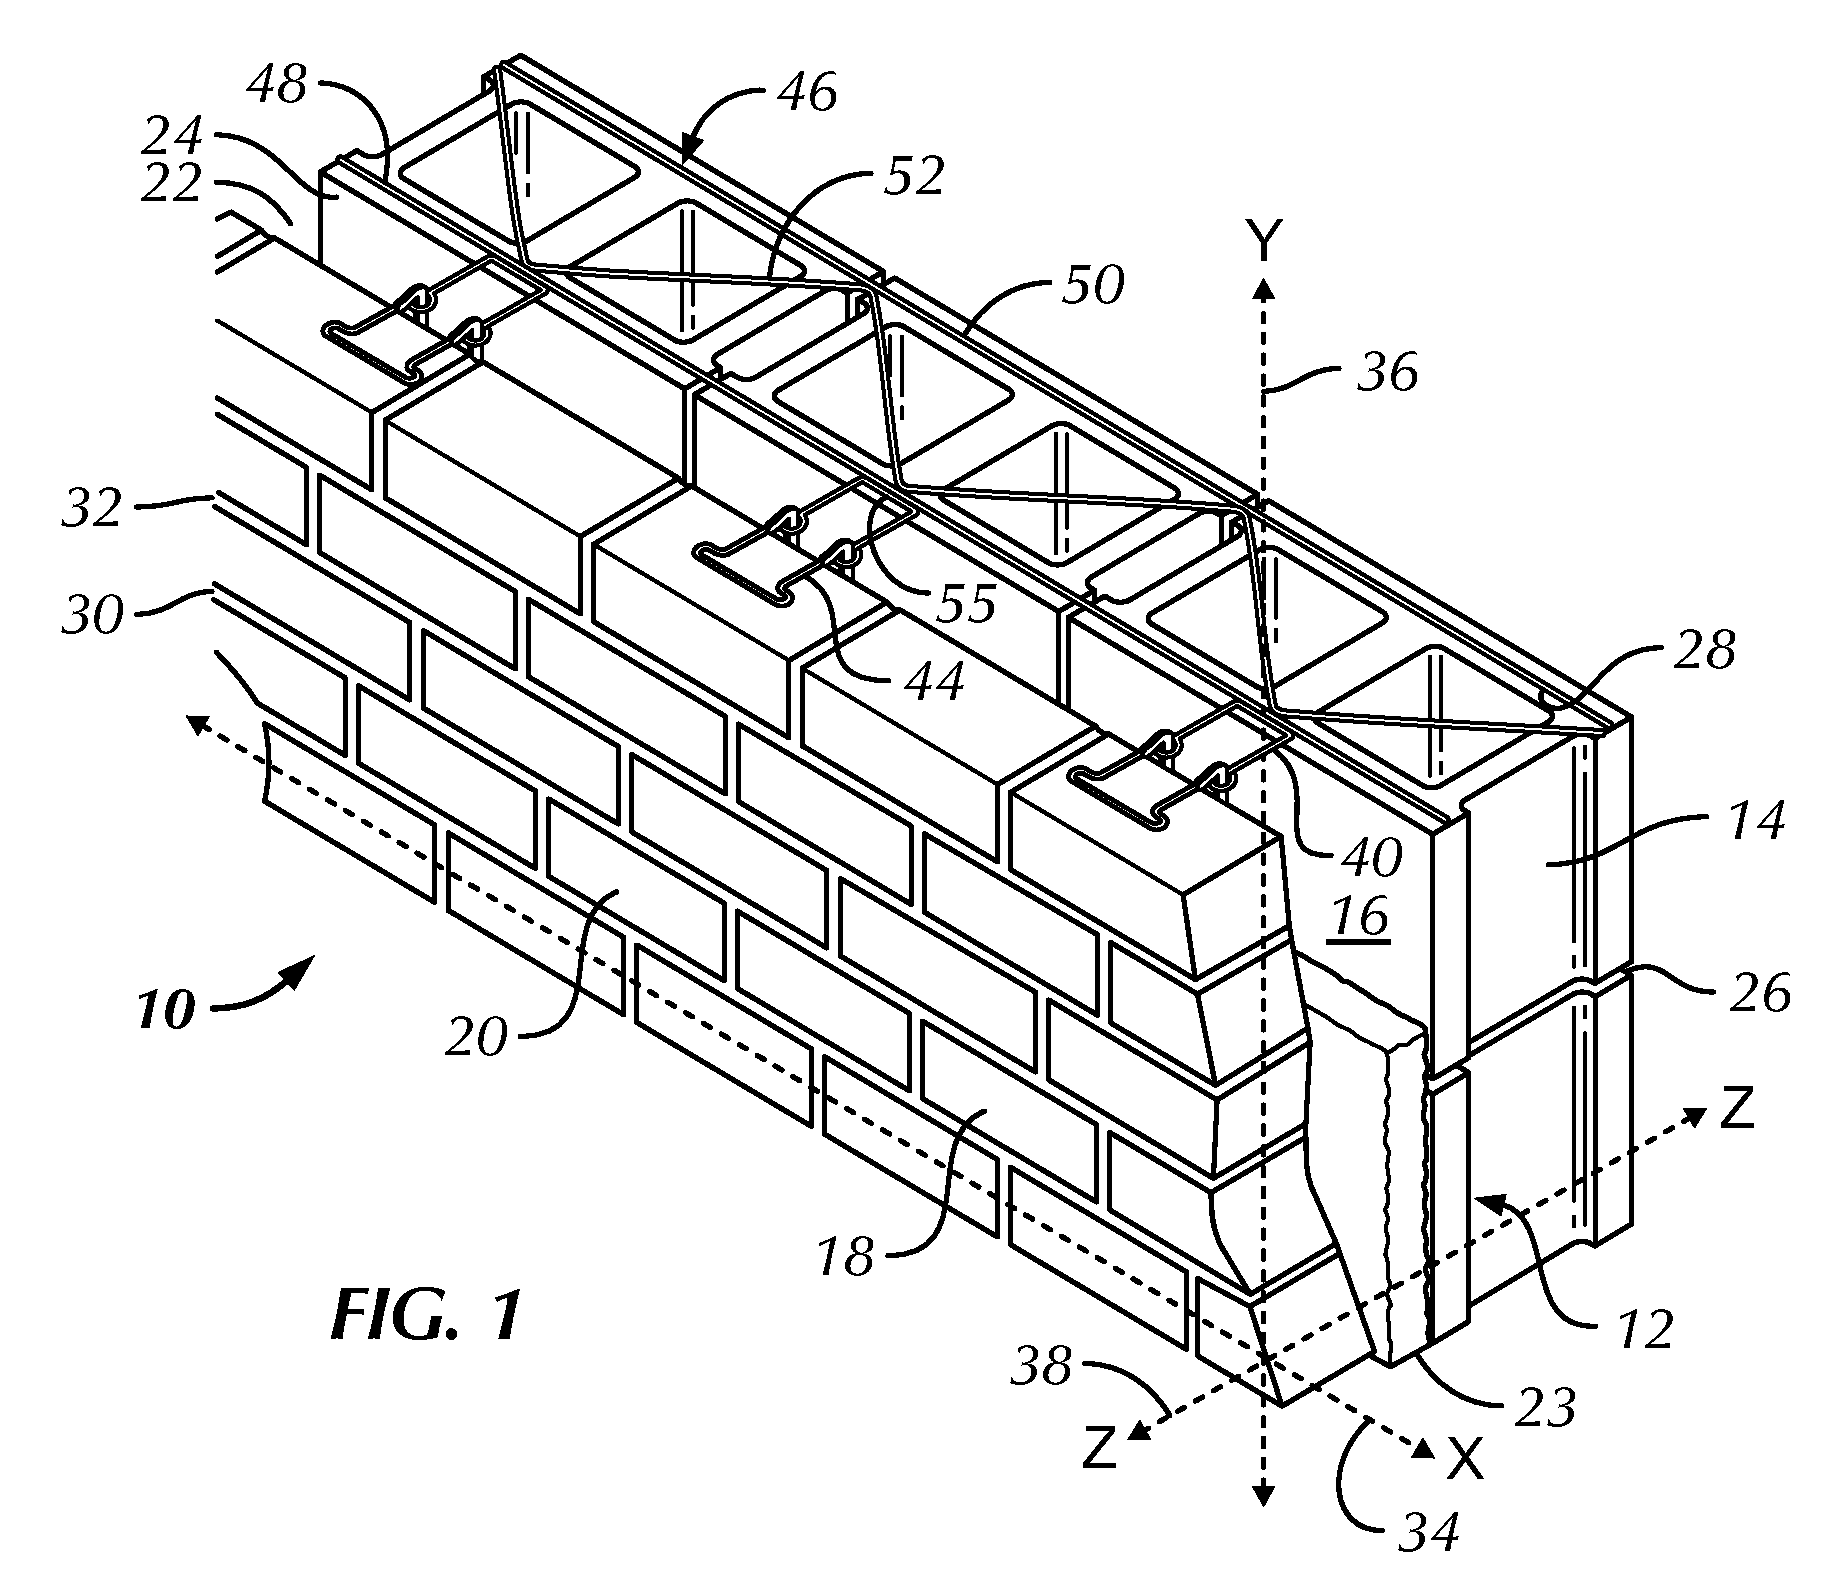 Pullout resistant pintle and anchoring system utilizing the same